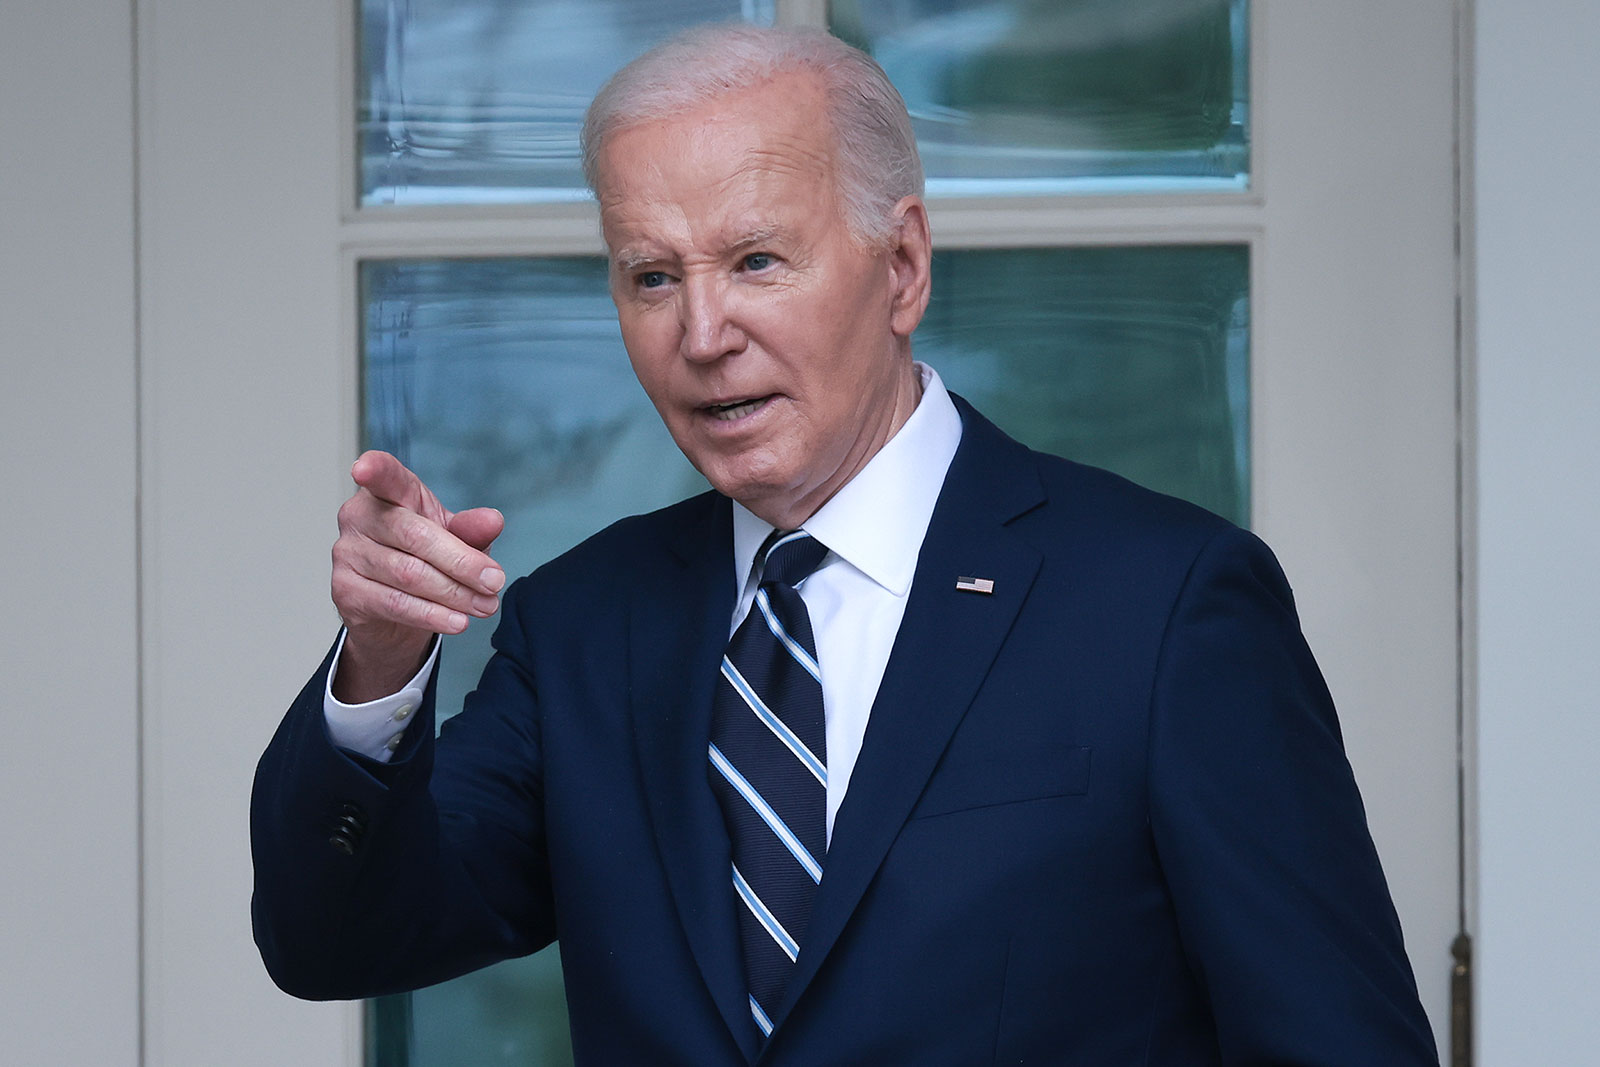 President Joe Biden returns to the Oval Office from the Rose Garden on Tuesday, May 14.